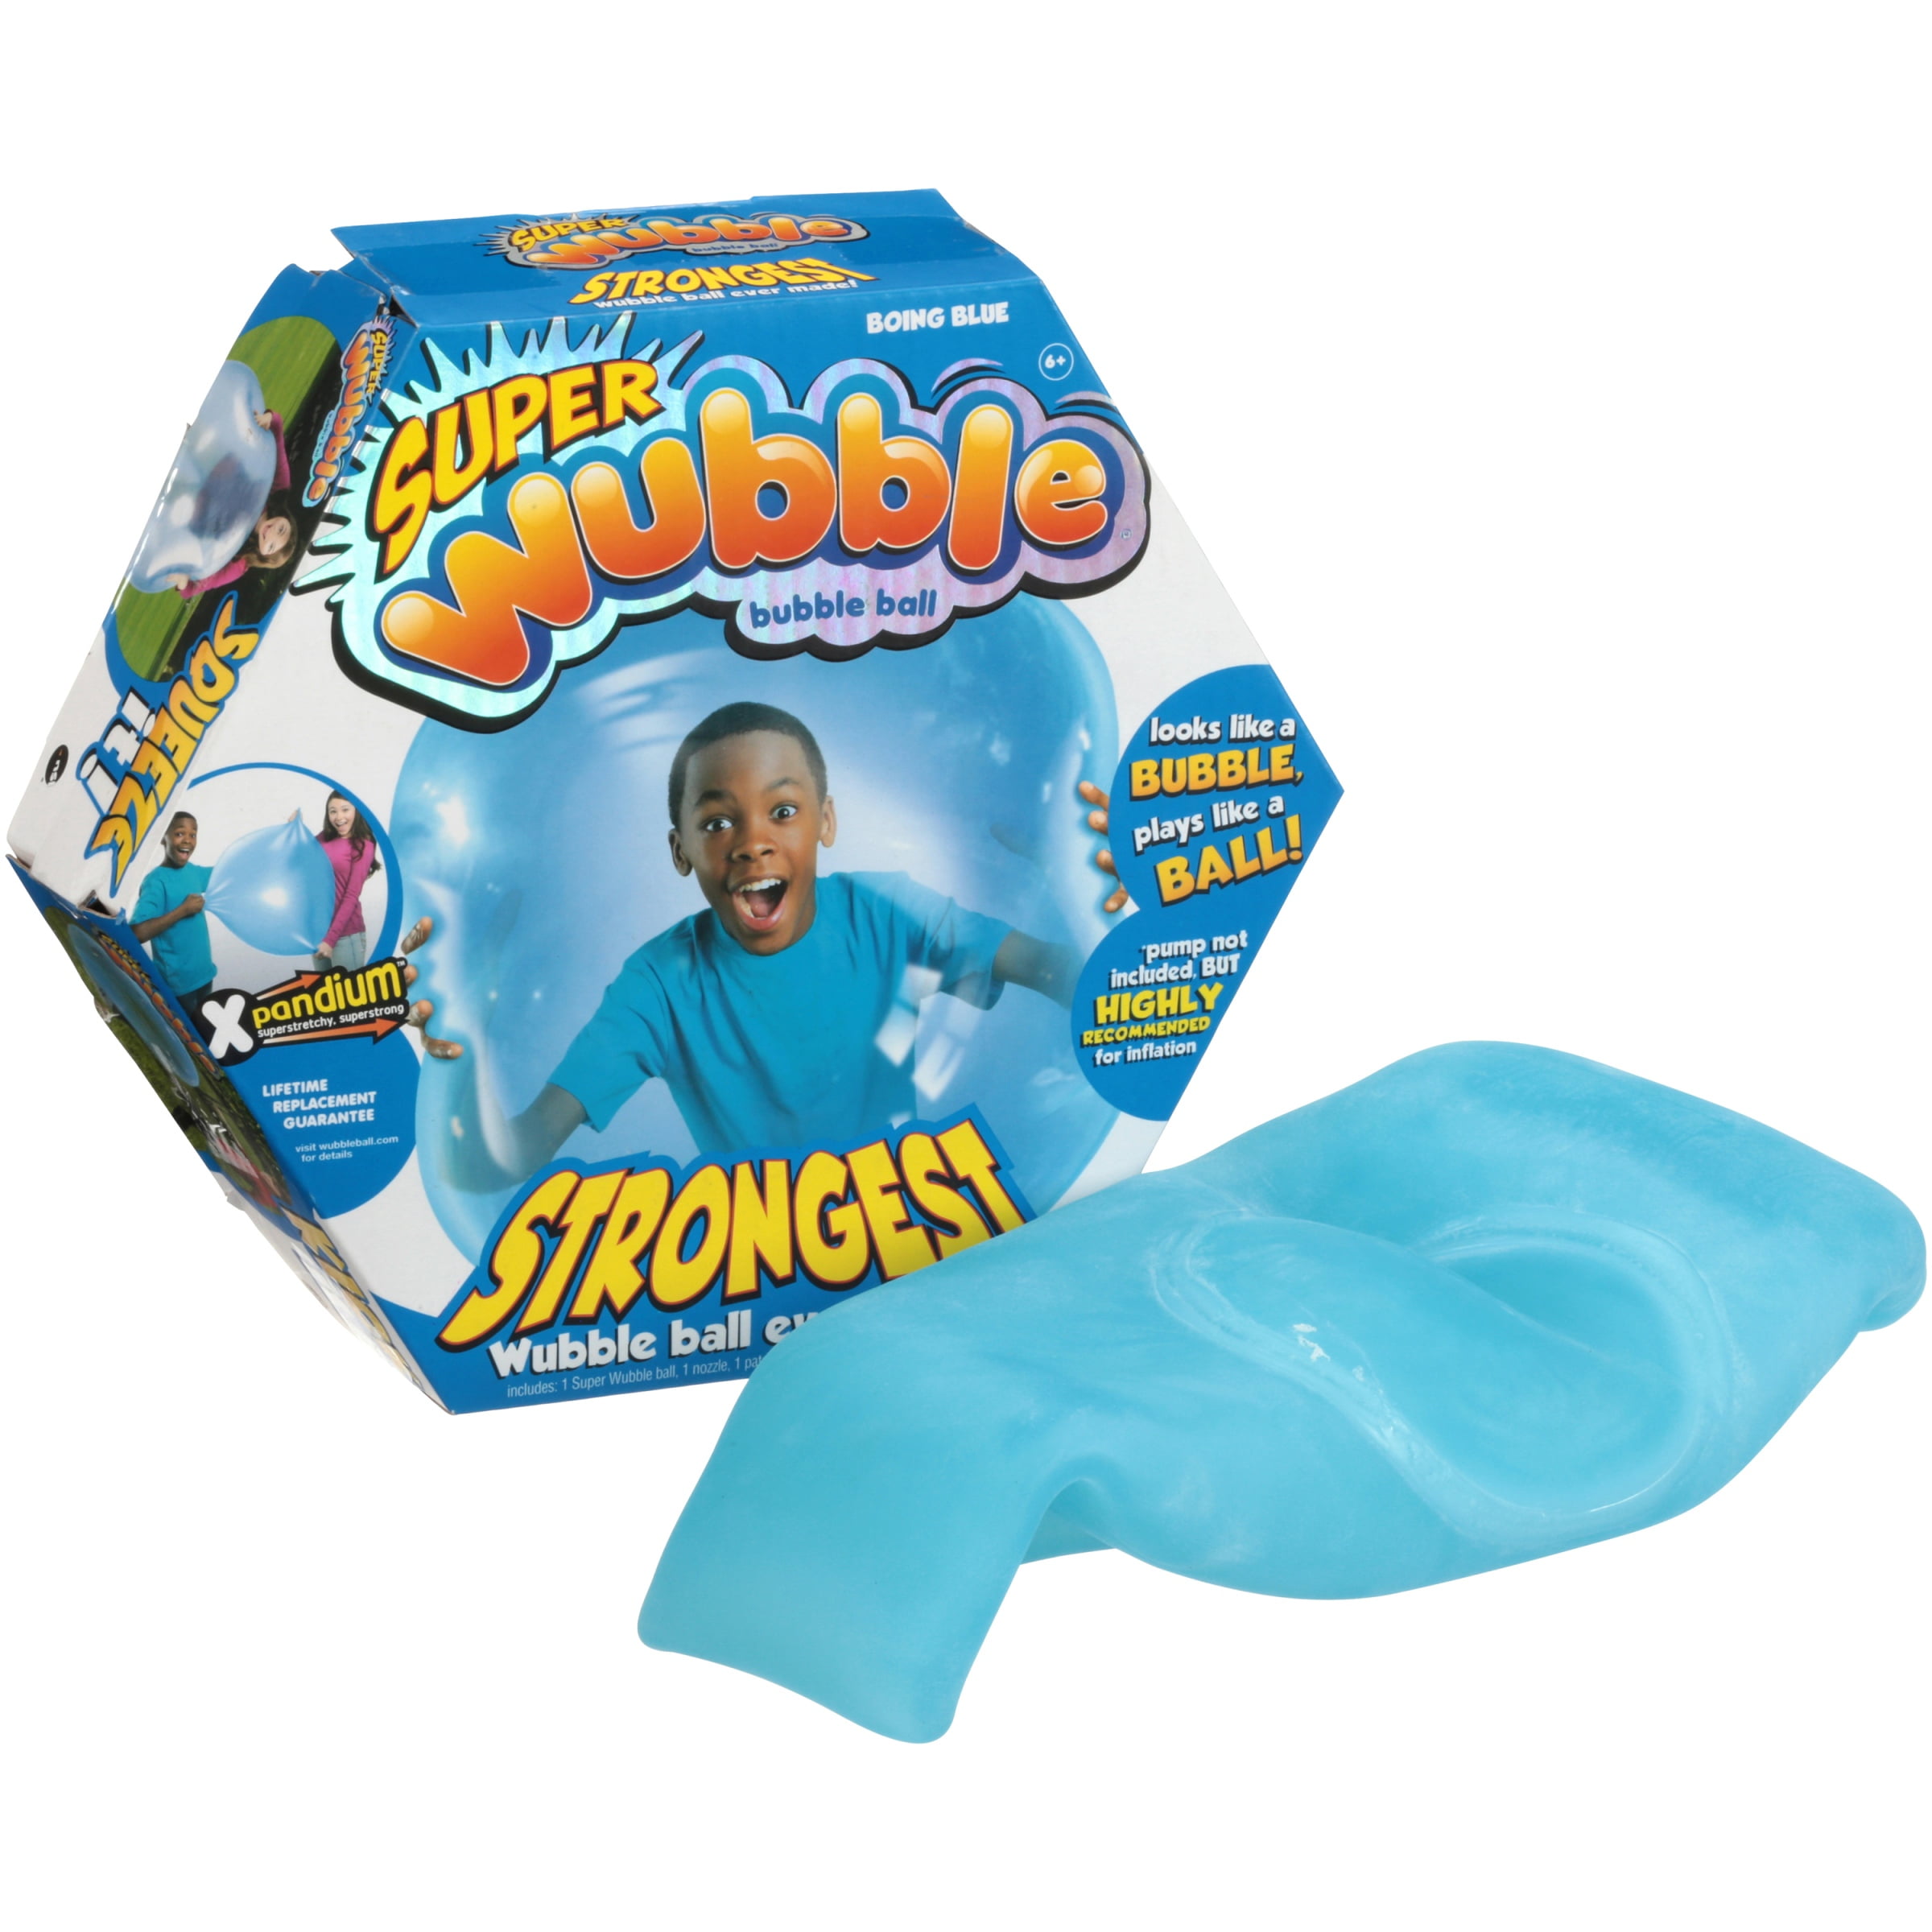 72060-1 Details about   The Amazing WUBBLE Bubble Ball Air Pump Battery Operated No Nozzle 